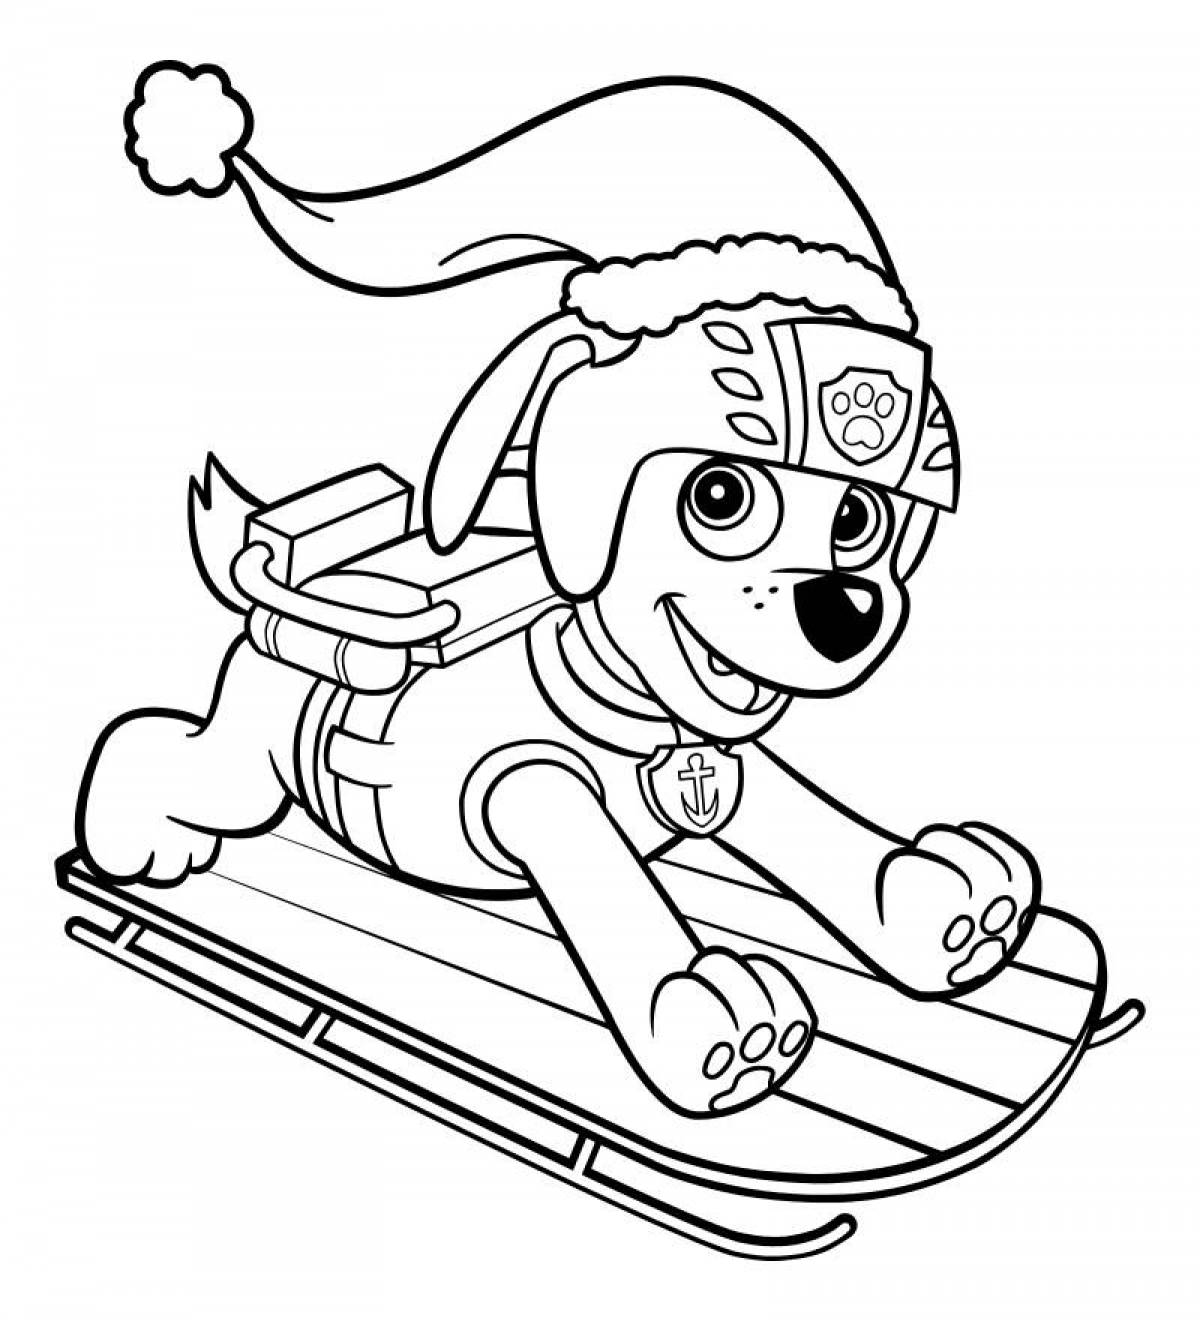 Adorable Paw Patrol coloring book for kids